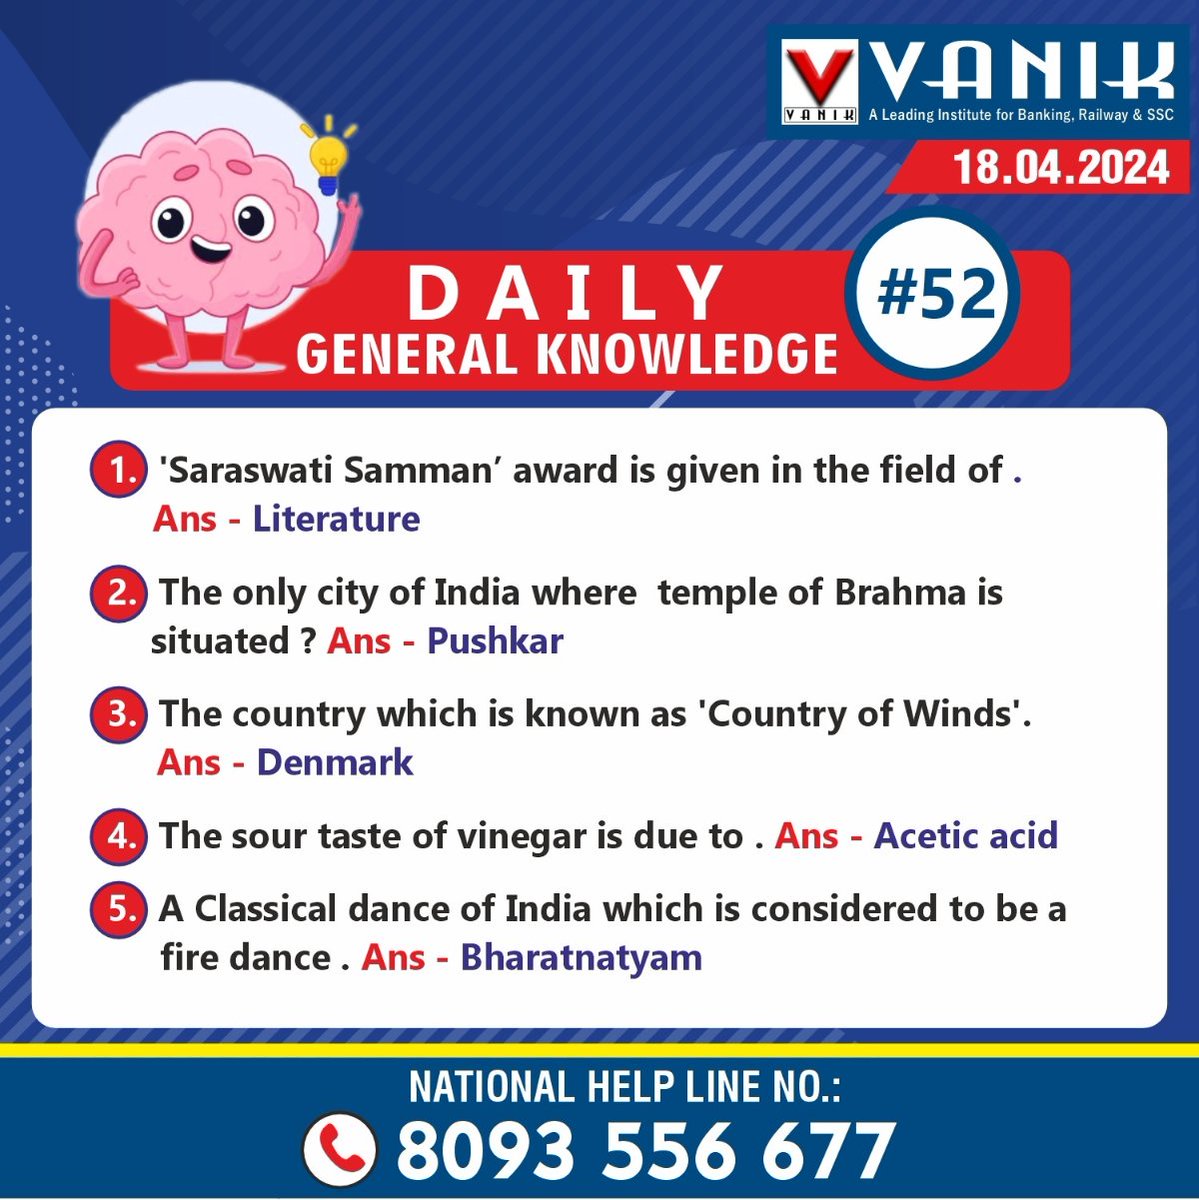 FIVE Points To Remember #General_Knowledge
.
.
🧠Daily Interesting 5 points to Remember
📚General knowledge. Learn something new
👇We are Here to make you smart.
🔄Share with your friends..

#Vanik promotes quality #Education4All

 #top10points #knowledge #gk #worldnews